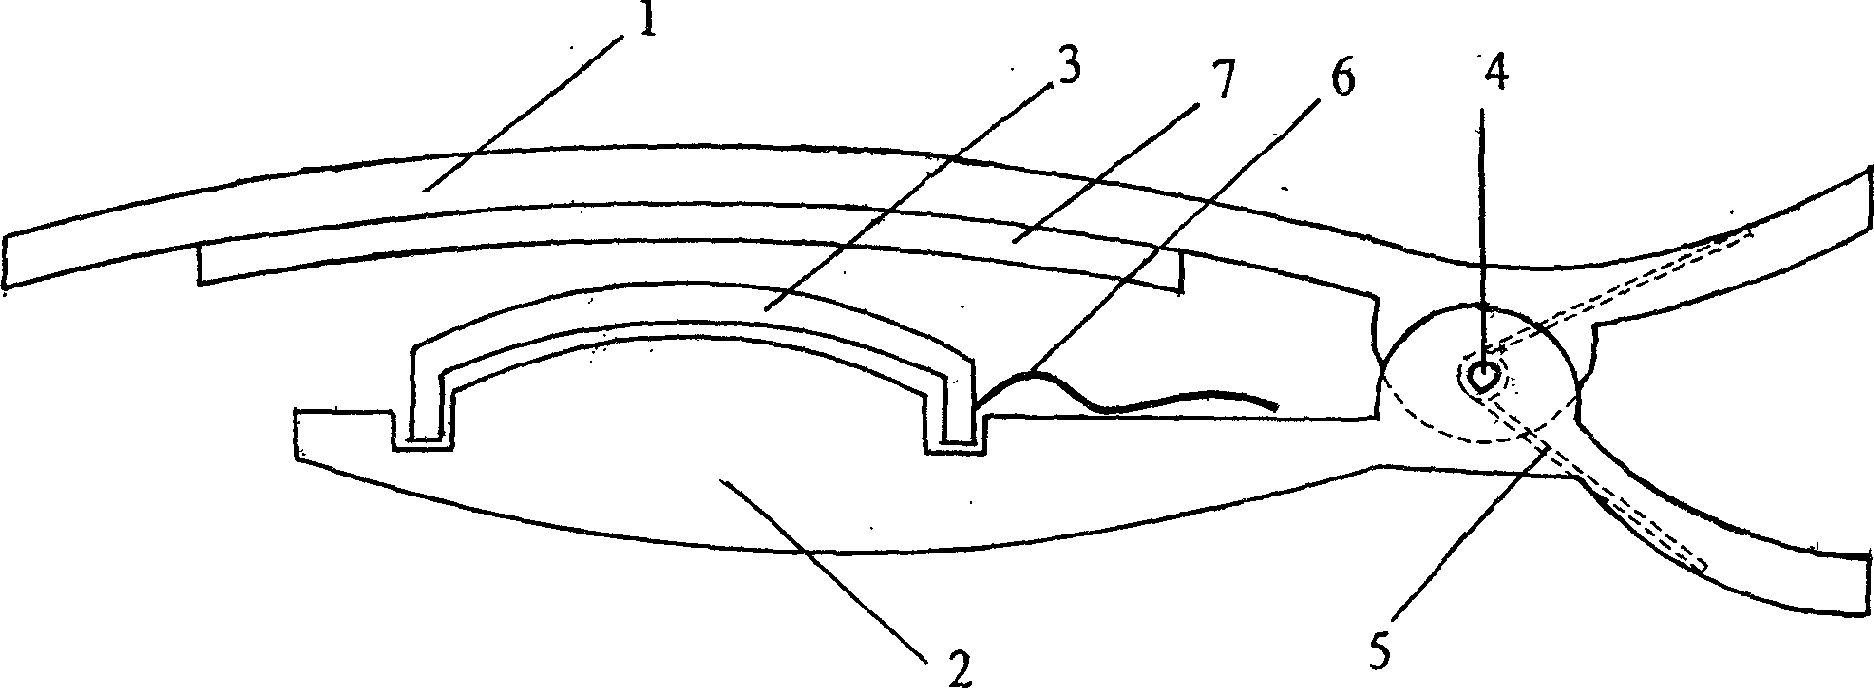 Reference electrode clamp used for biological impedance, electric resistance or potential measurement